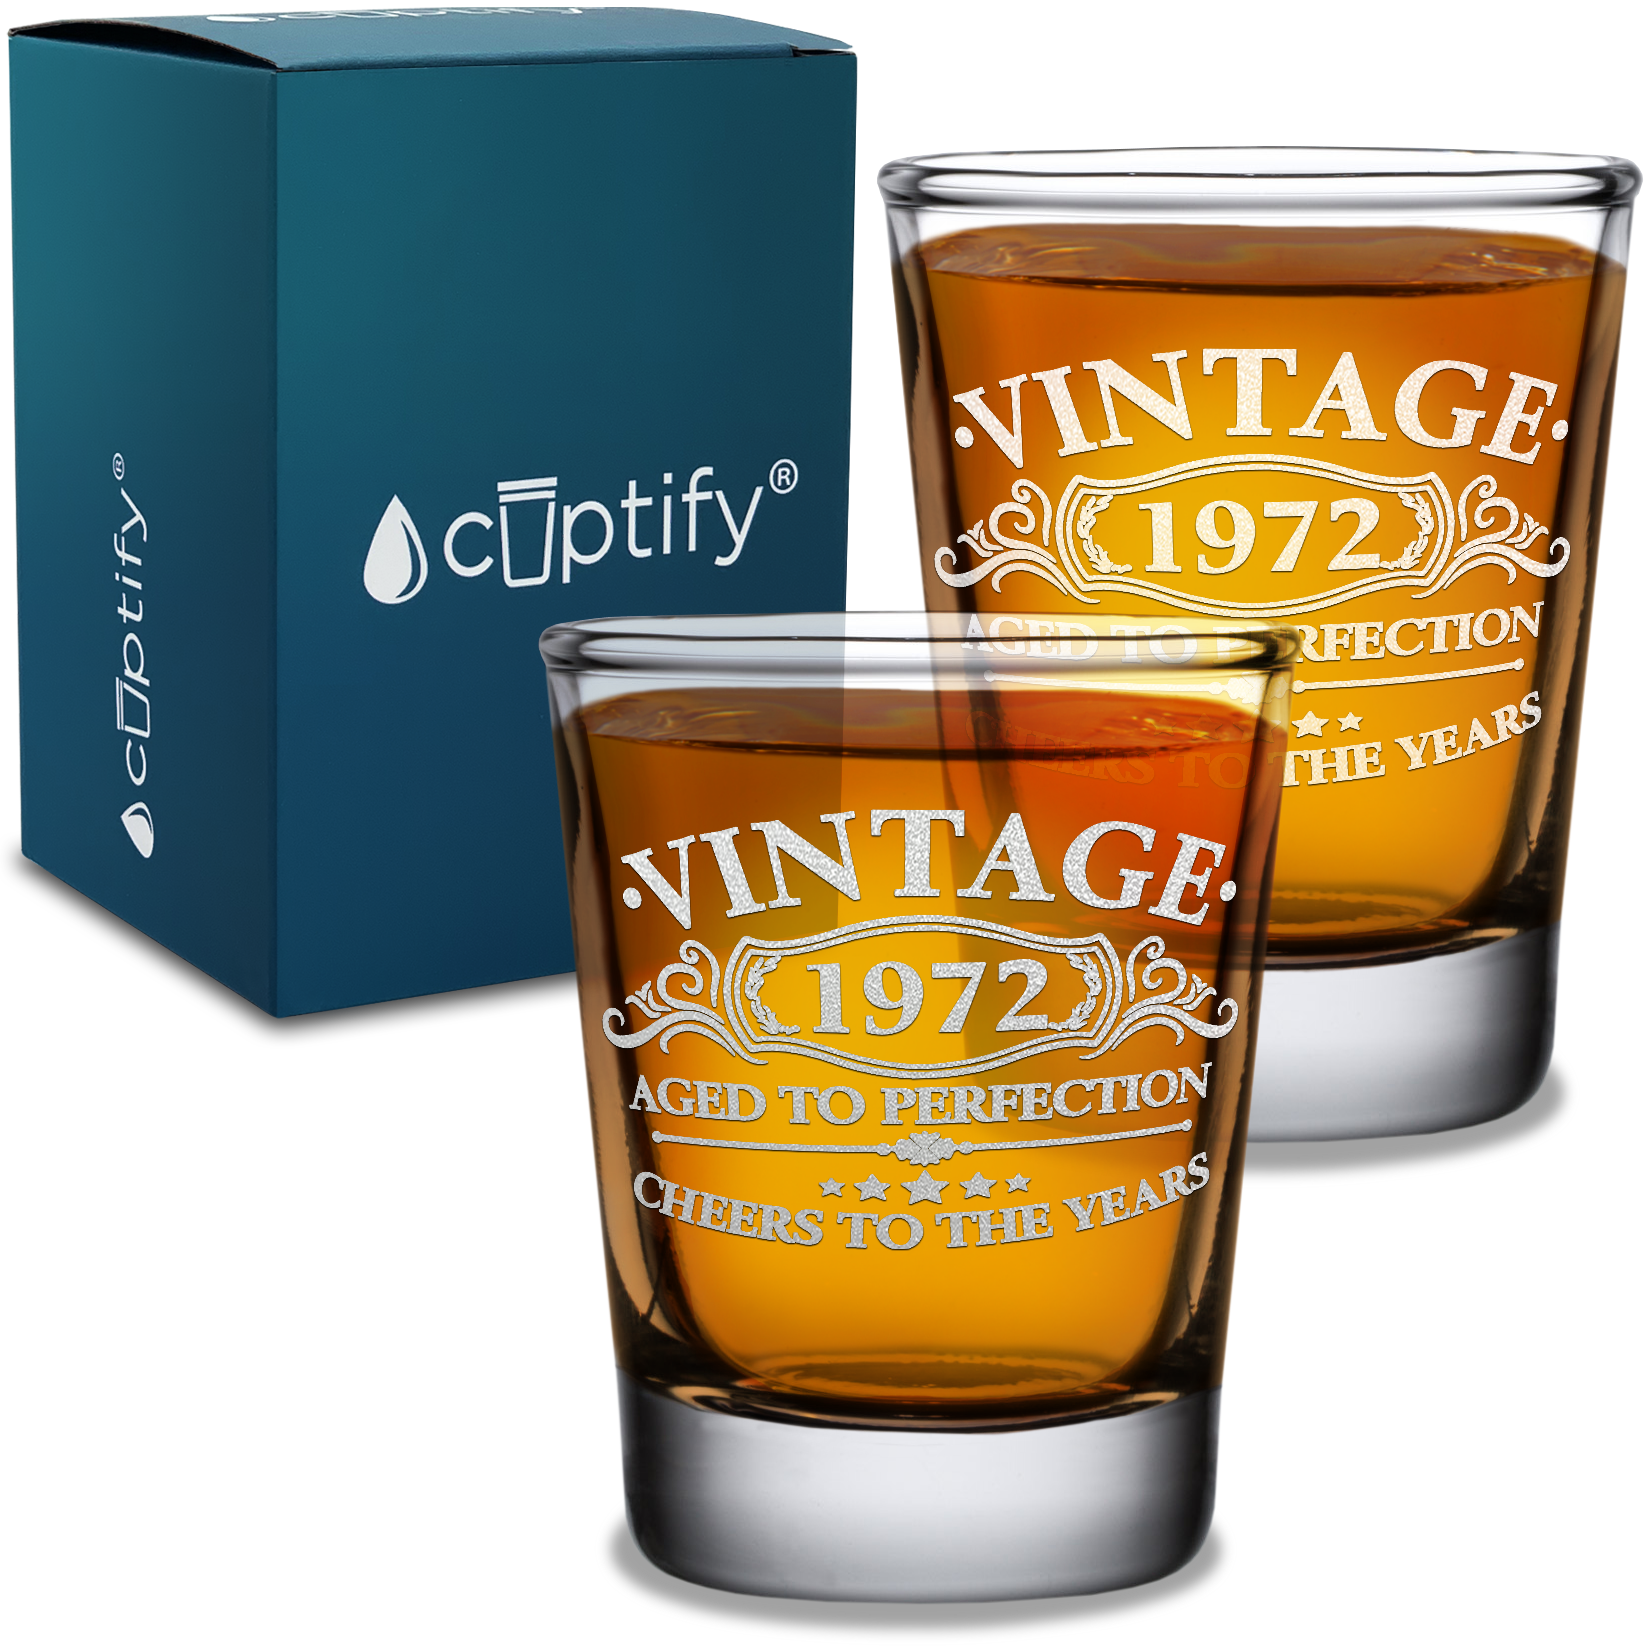 Vintage Aged To Perfection Cheers To 49 Years 1972 Laser Engraved on 2oz Shot Glasses - Set of 2